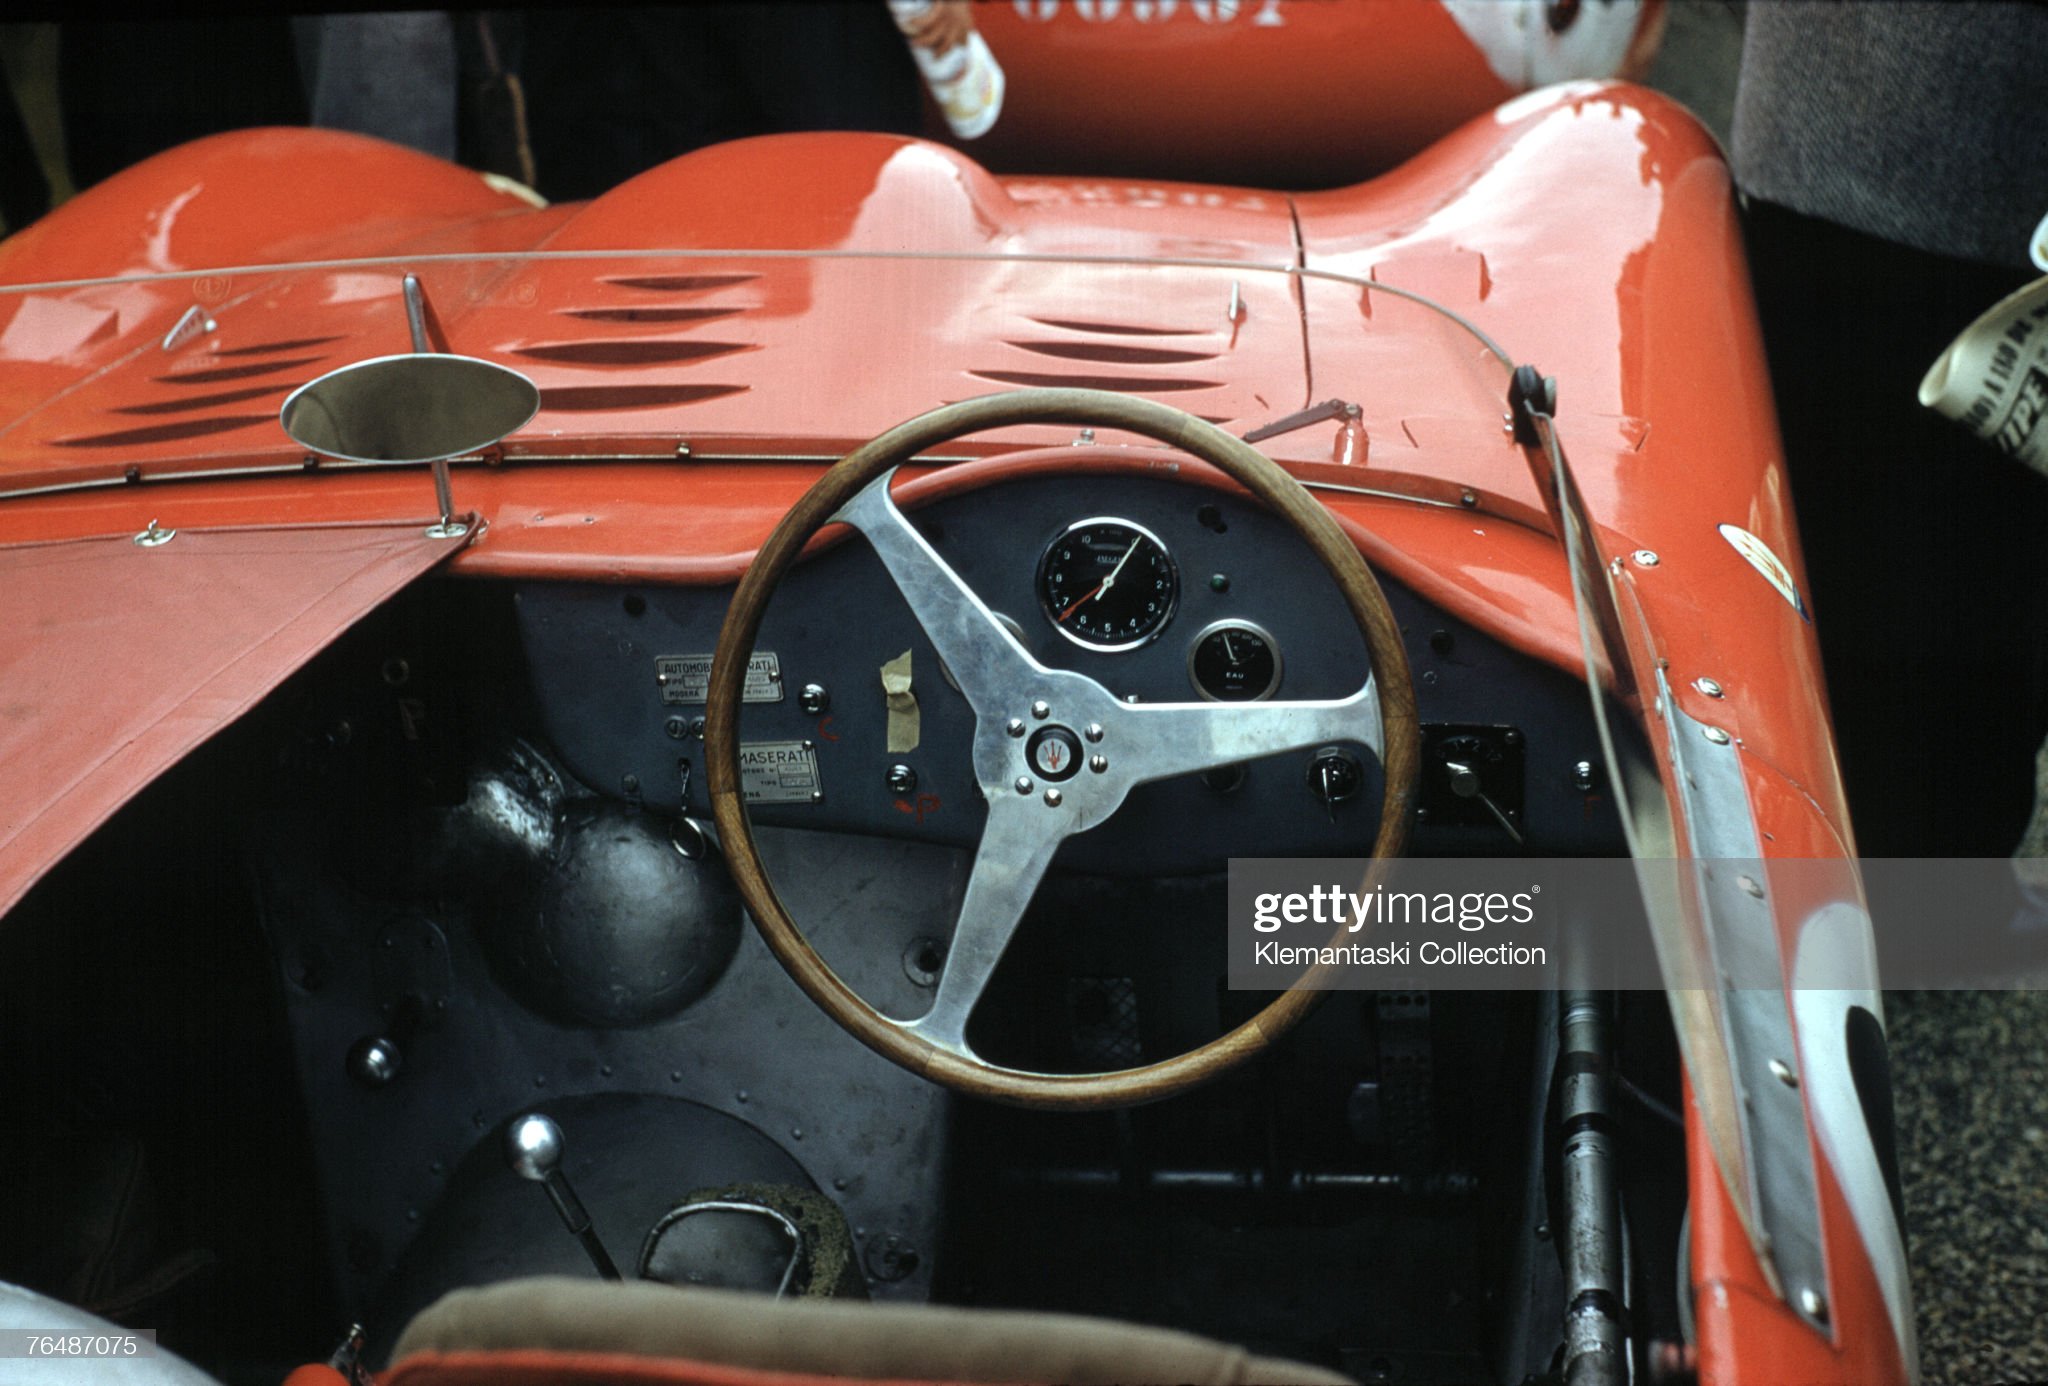 Cockpit of the Maserati 450S which will be driven by Jean Behra and Andre Simon in the 24 Hours of Le Mans.